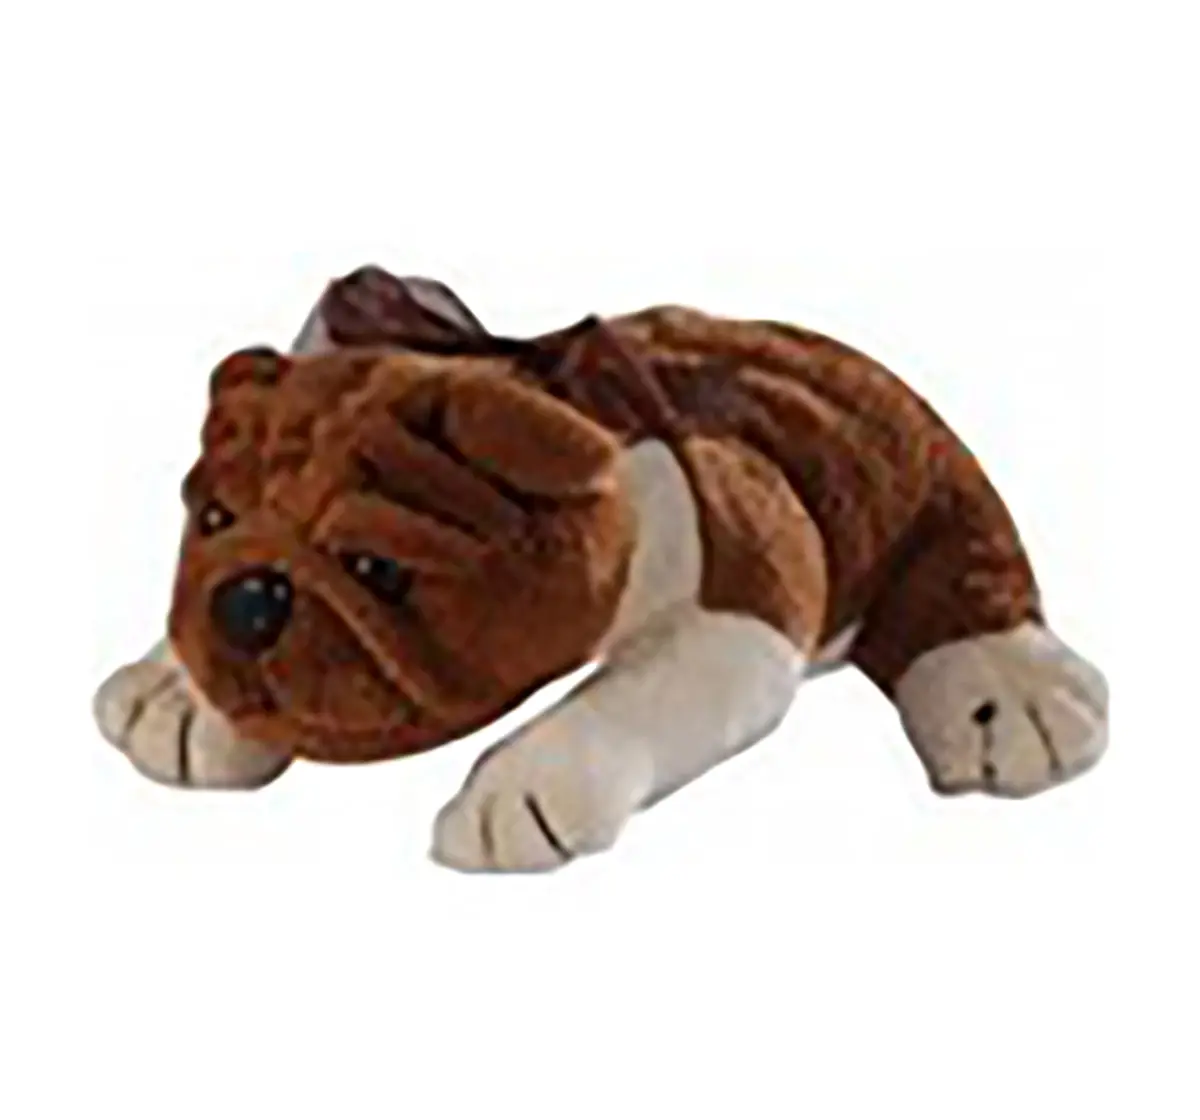 Soft Buddies Lying Bull Dog Large Quirky Soft Toys for Kids age 3Y+ - 37 Cm (Brown)